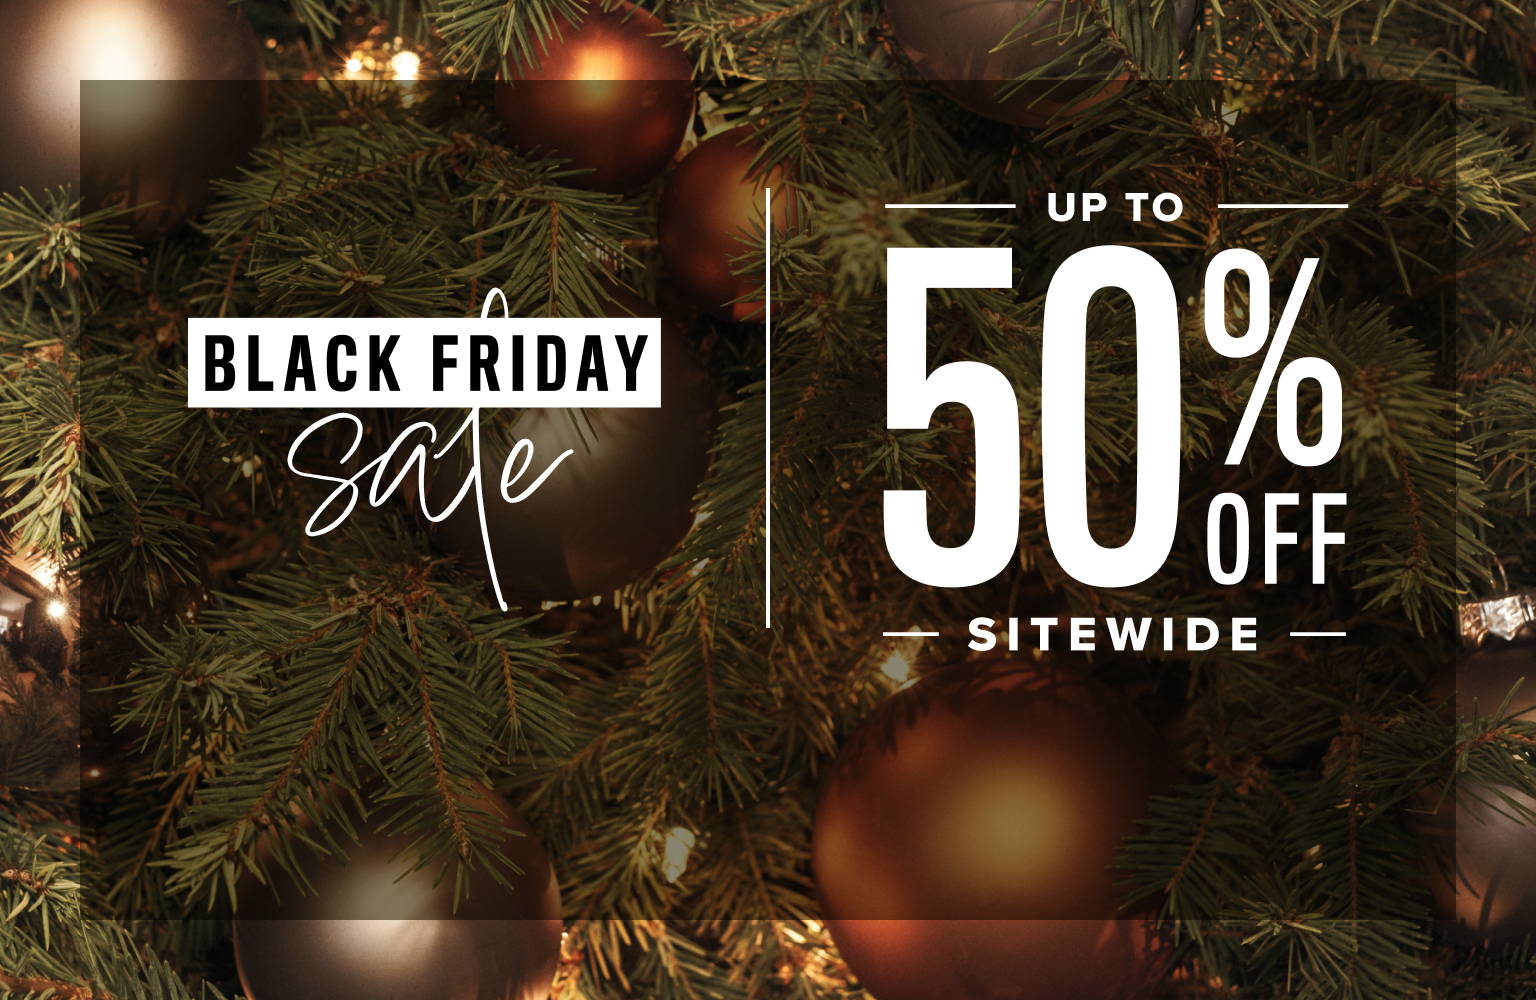 Black Friday Sale. Up to 50% Off Sitewide.